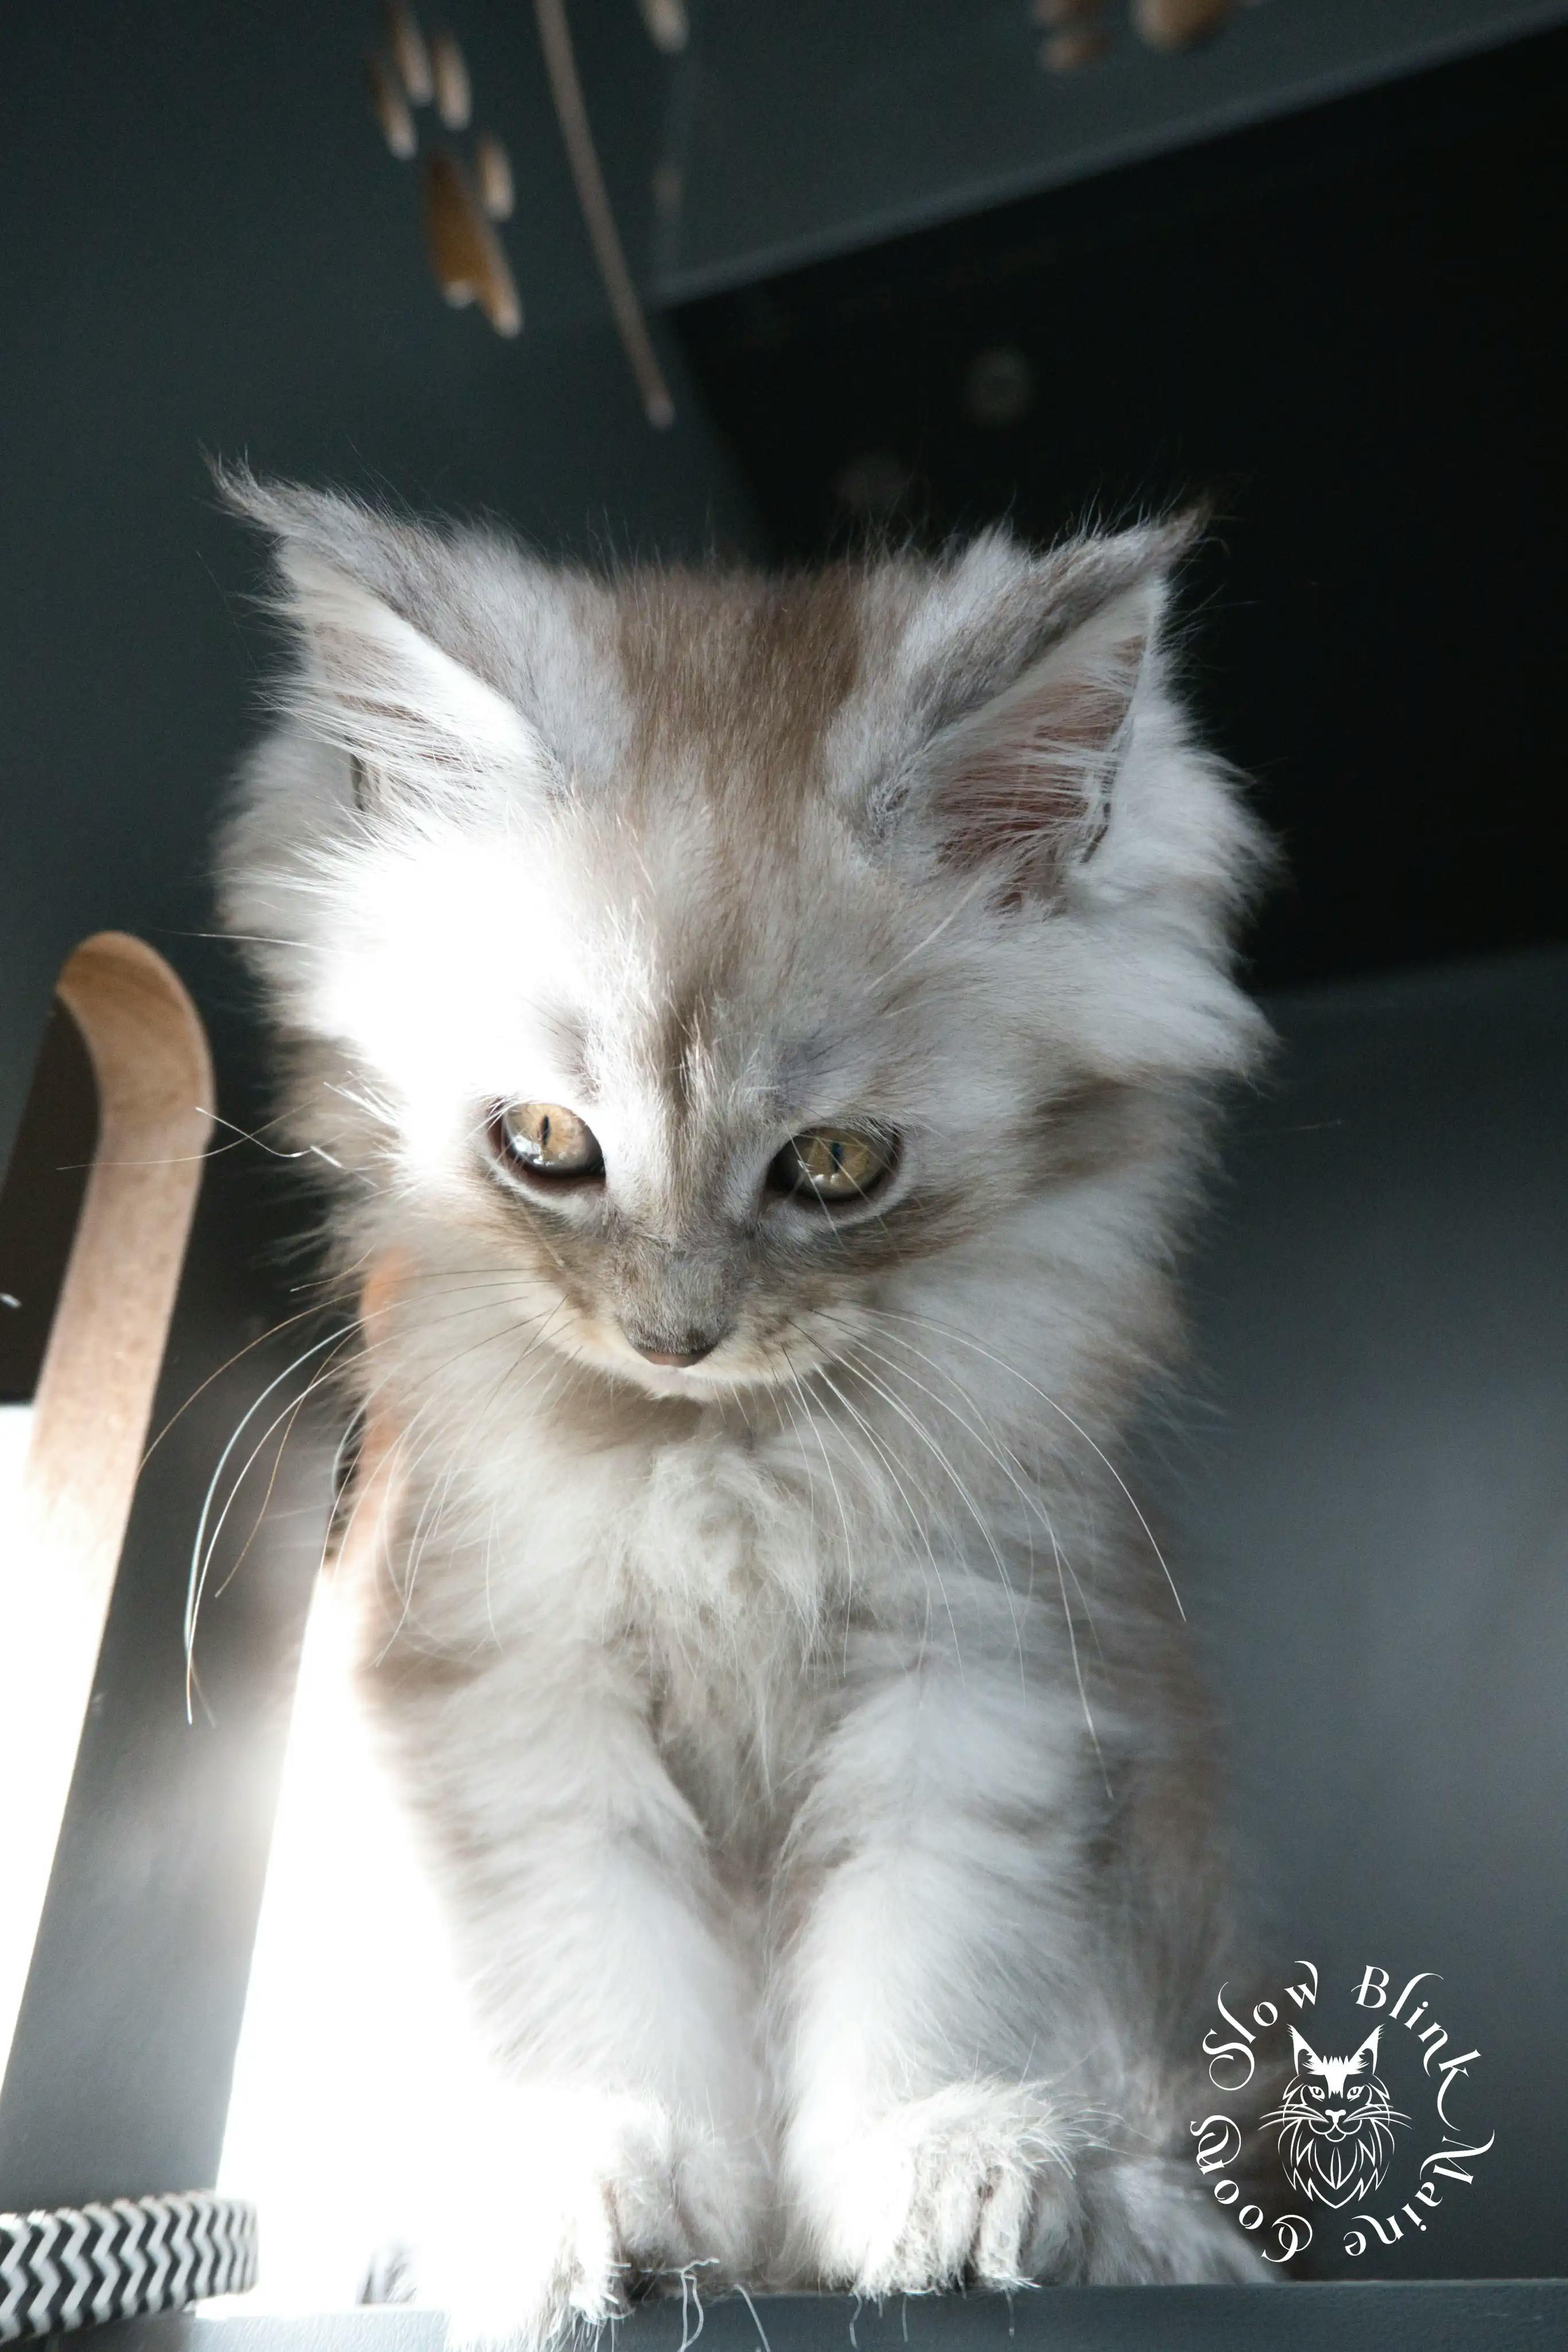 High Silver Maine Coon Kittens > black silver tabby maine coon kitten | ems code ns 22 23 24 25 | slowblinkmainecoons | 379